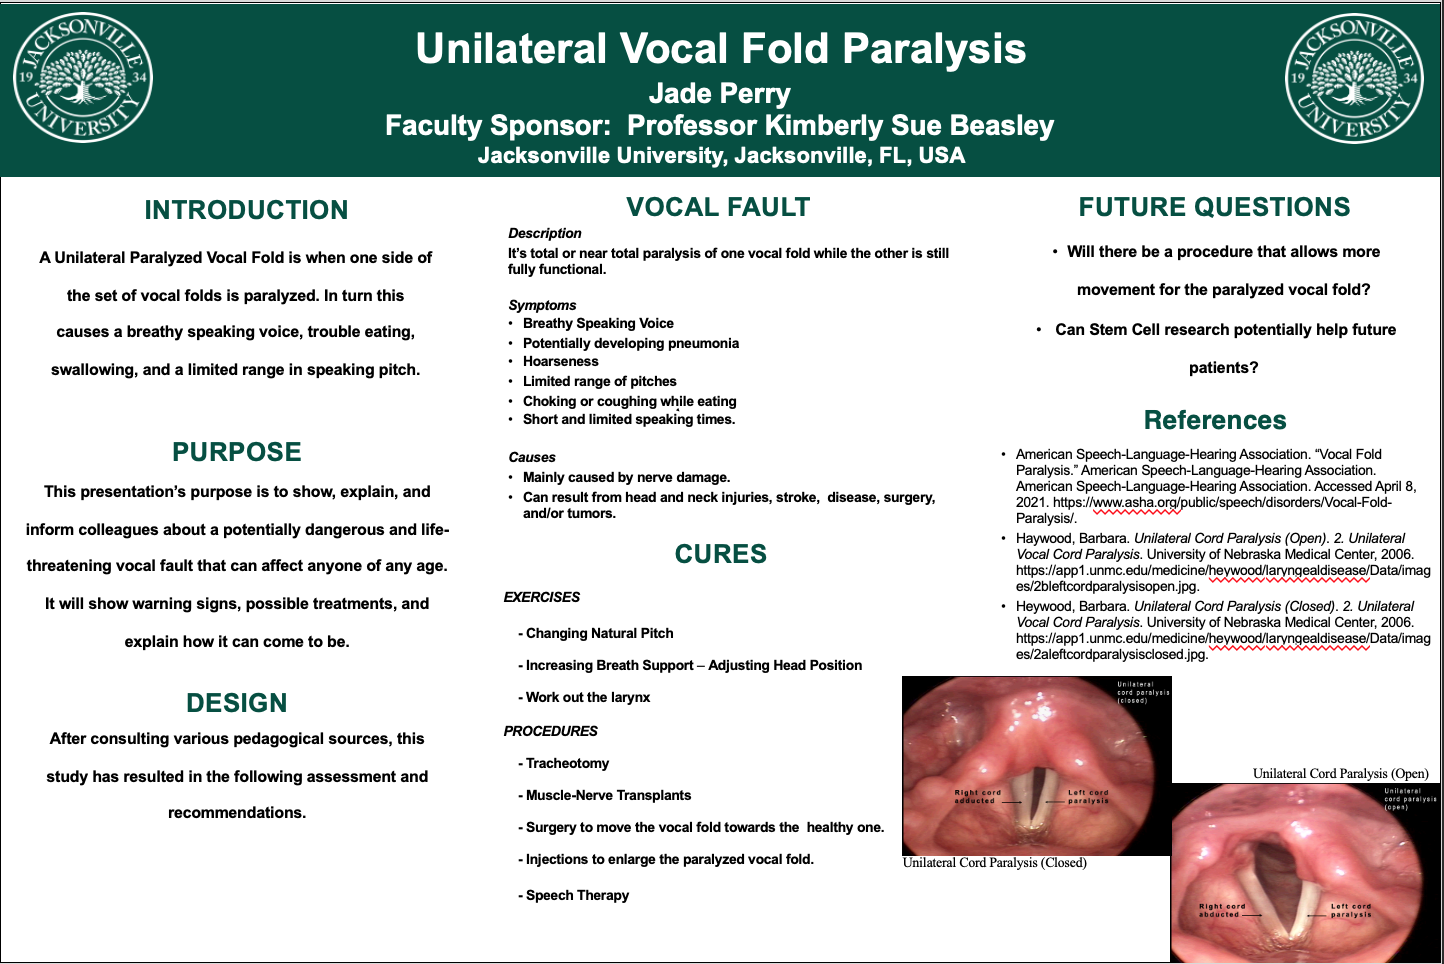 Showcase Image for Unilateral Vocal Fold Paralysis